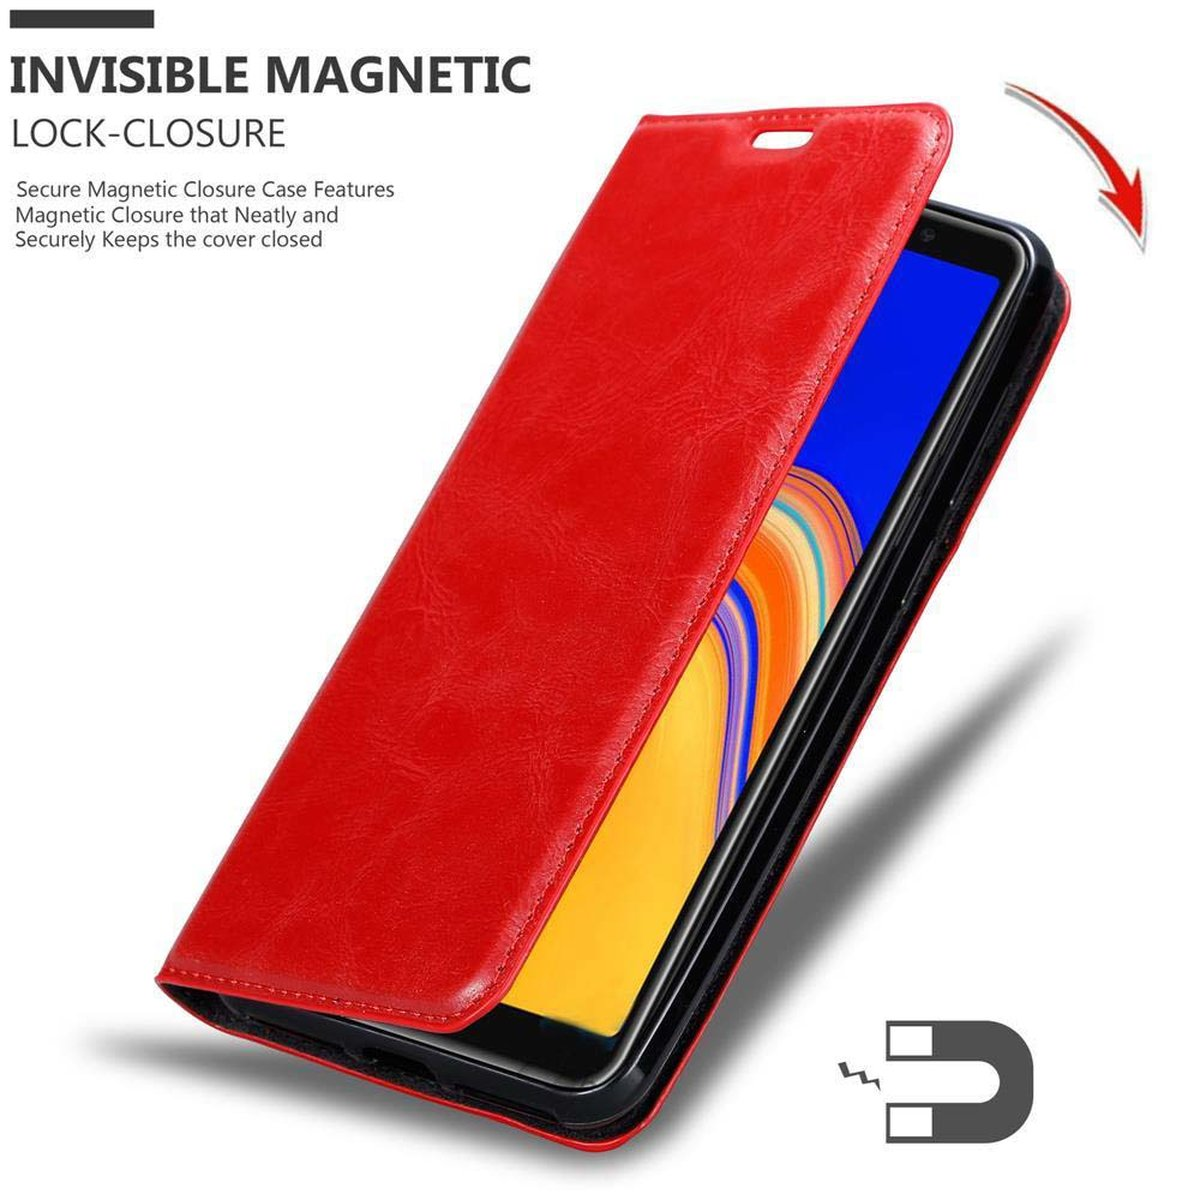 Invisible APFEL Bookcover, Magnet, ROT Hülle Galaxy Samsung, CADORABO A6s, Book